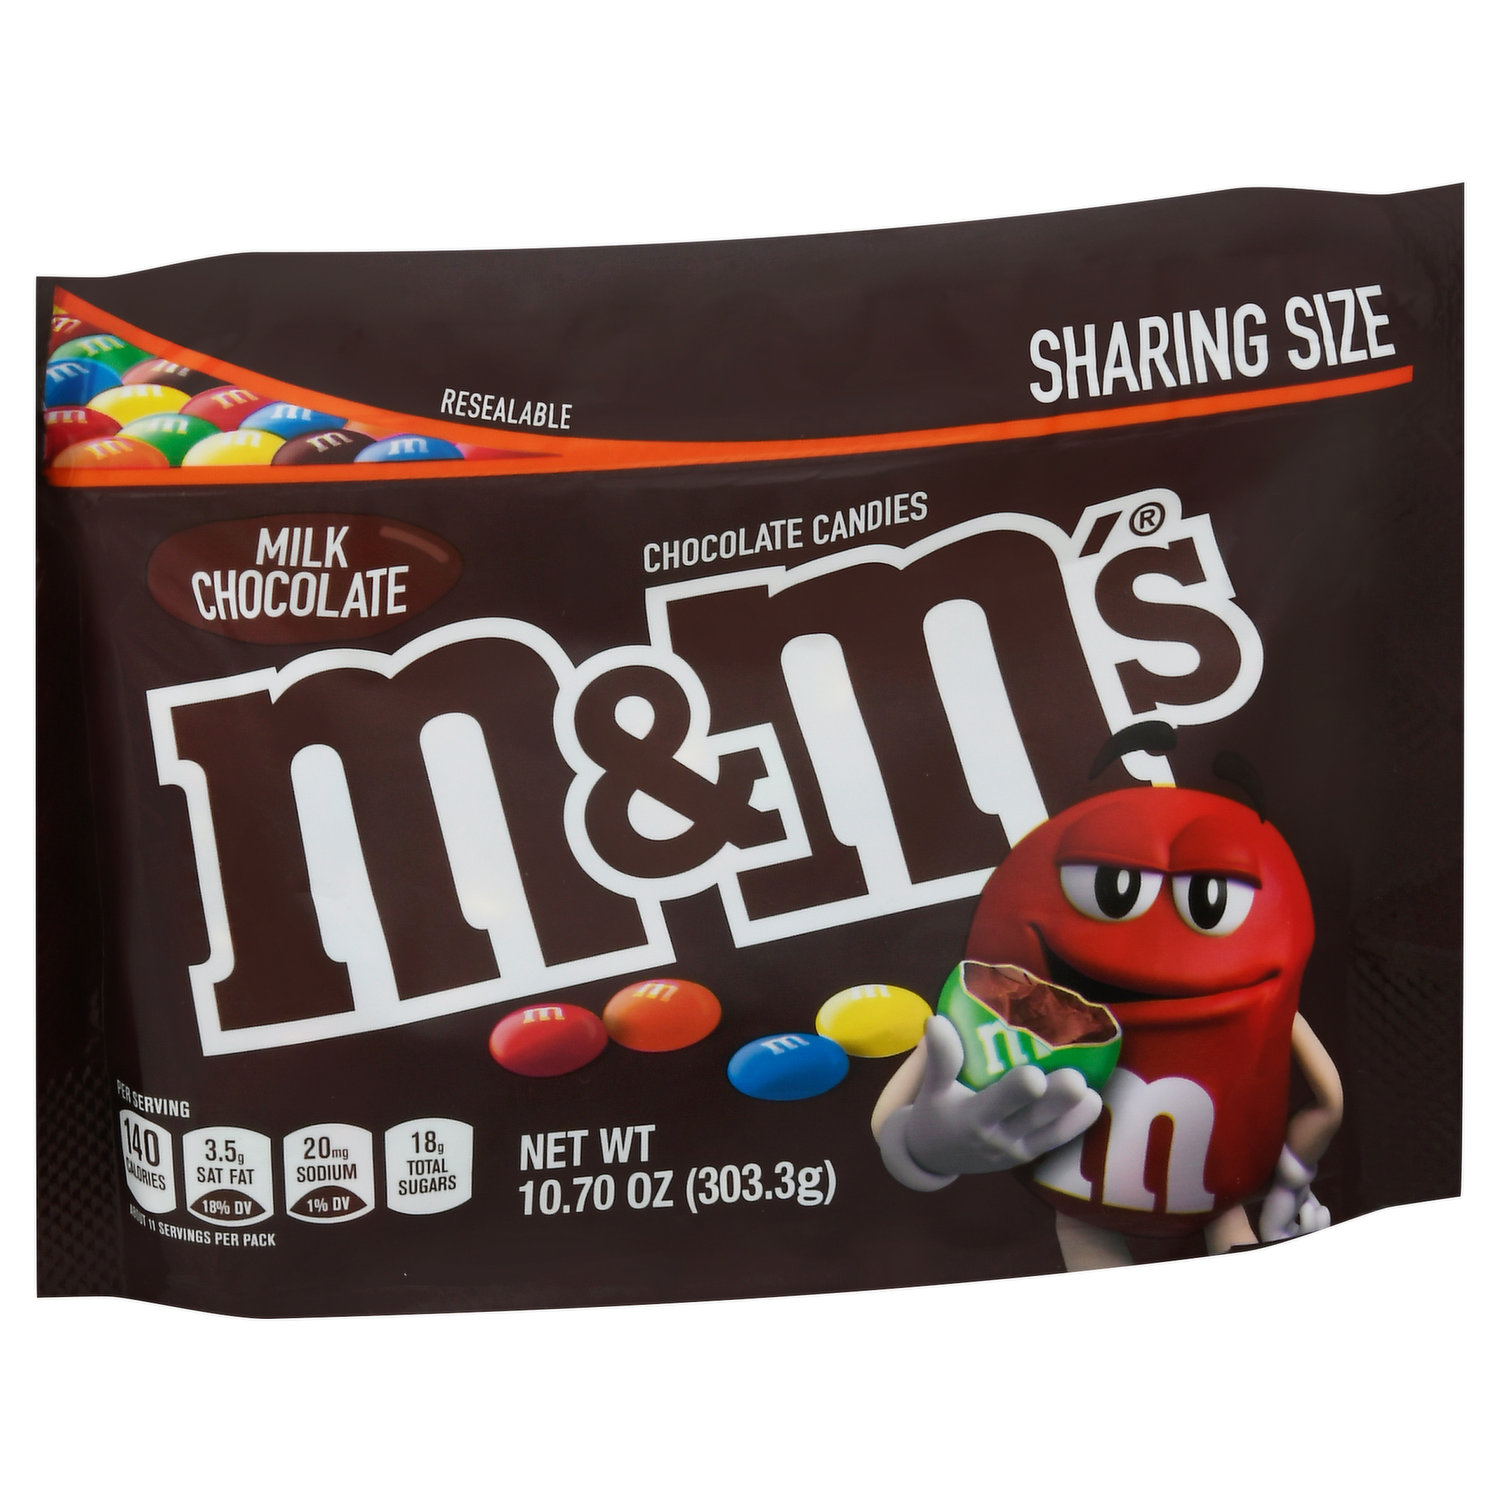 M&M'S Crunchy Cookie Chocolate Candy - Sharing Size - Shop Candy